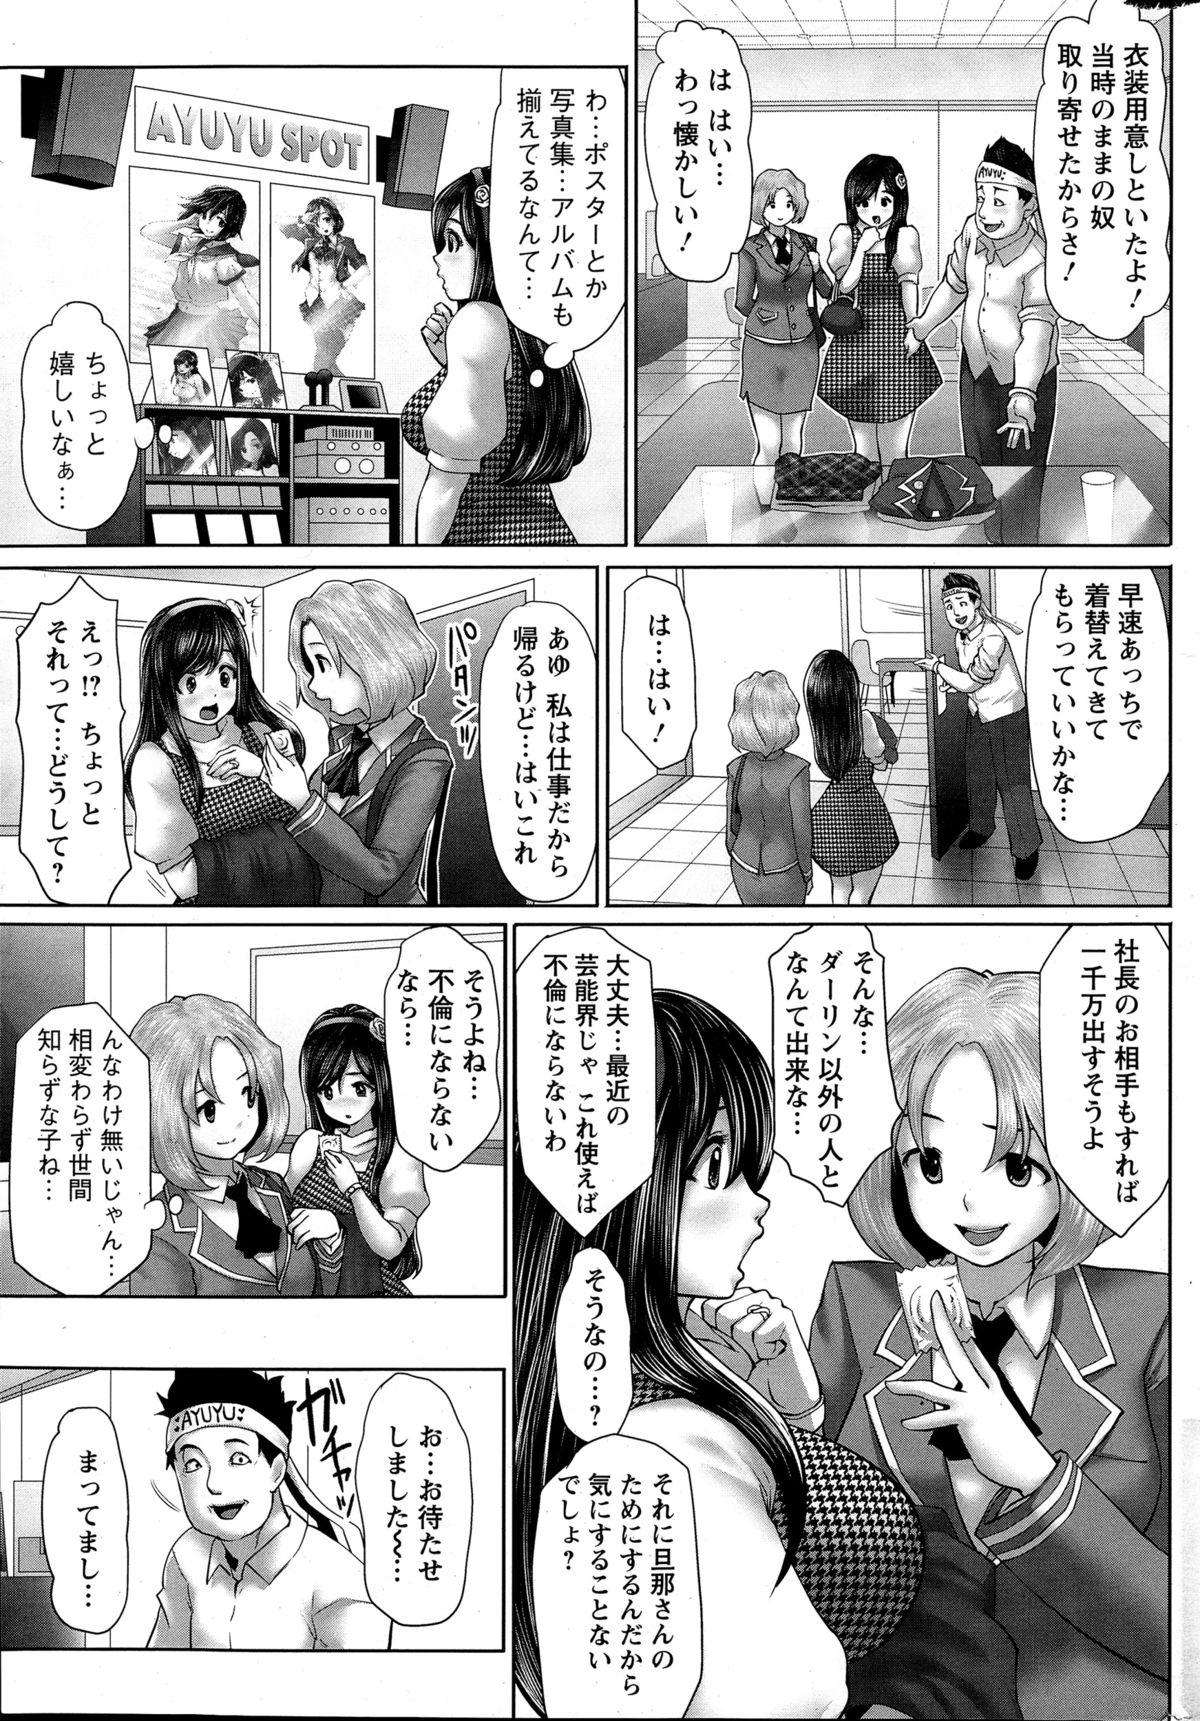 Esposa Action Pizazz Special 2015-06 Romance - Page 11